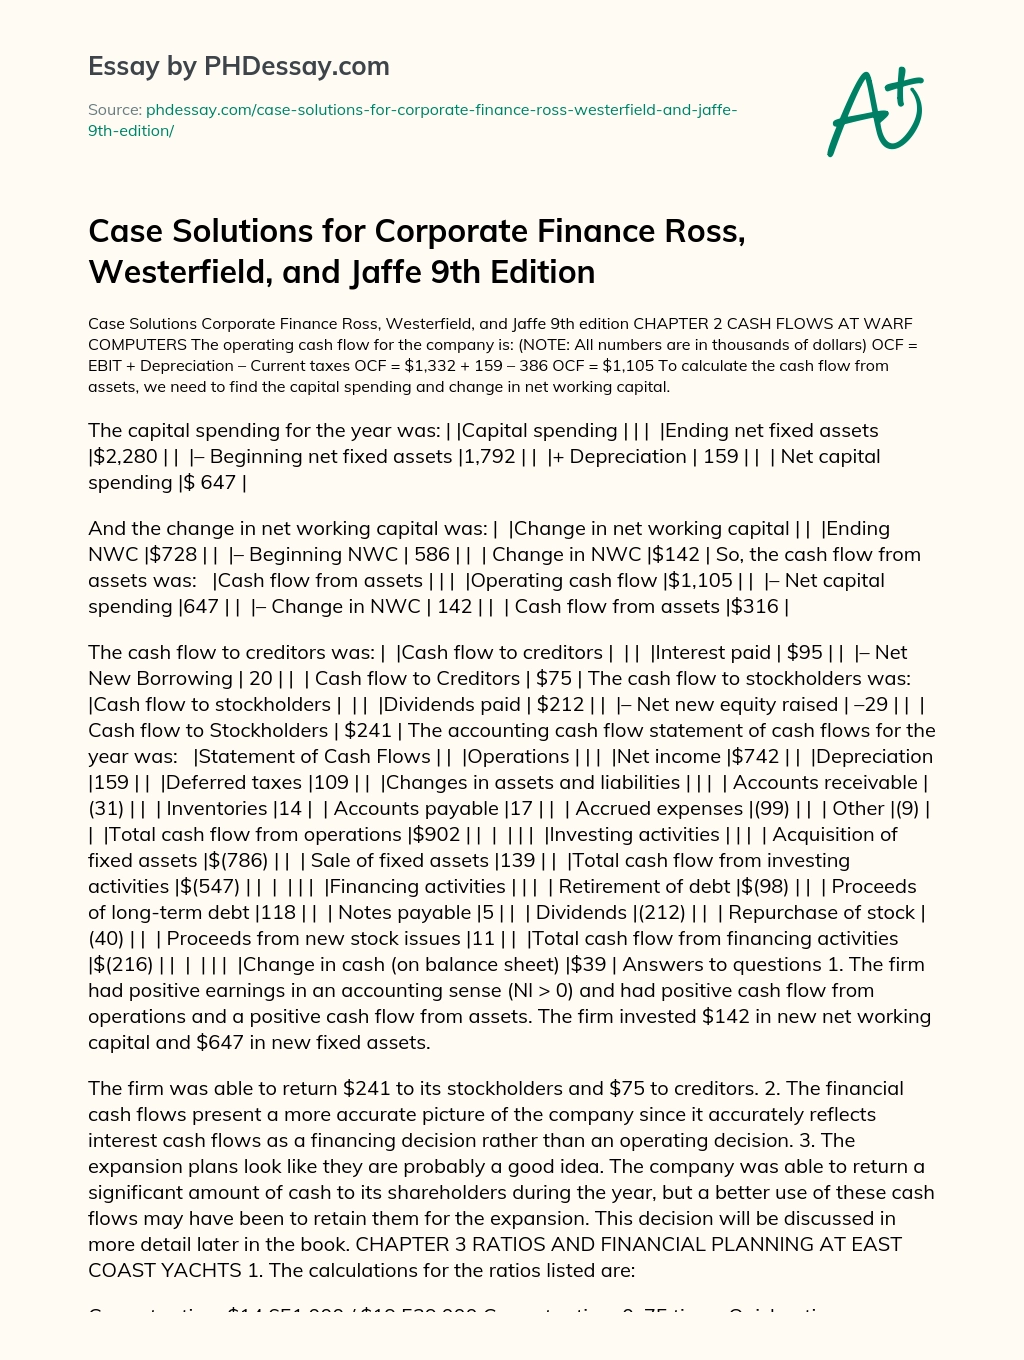 Case Solutions for Corporate Finance Ross, Westerfield, and Jaffe 9th Edition essay